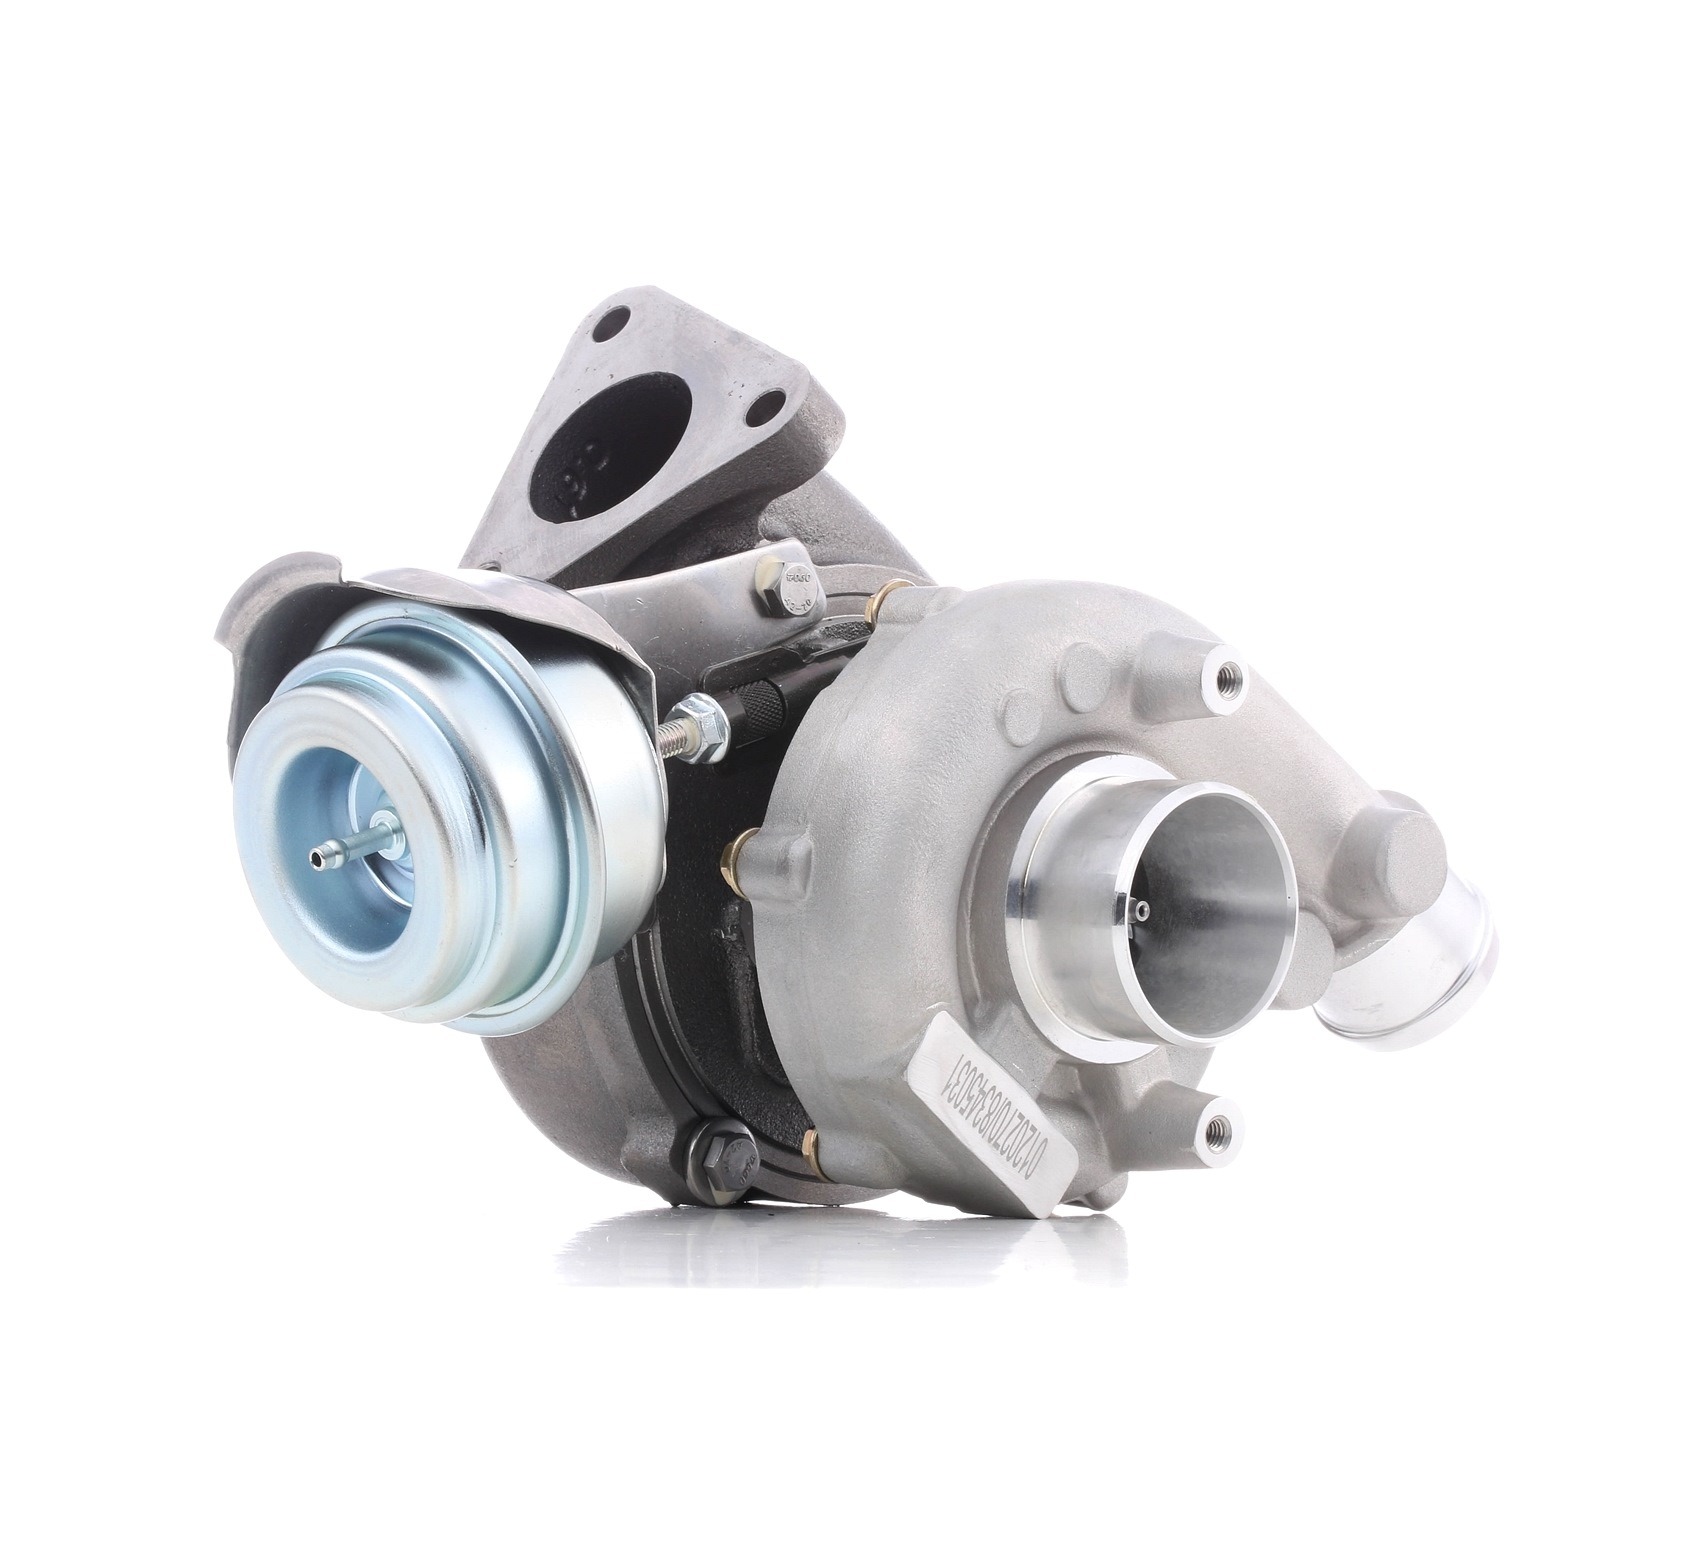 STARK SKCT-1190025 Turbocharger Exhaust Turbocharger, Turbo, Pneumatic, with gaskets/seals, Incl. Gasket Set